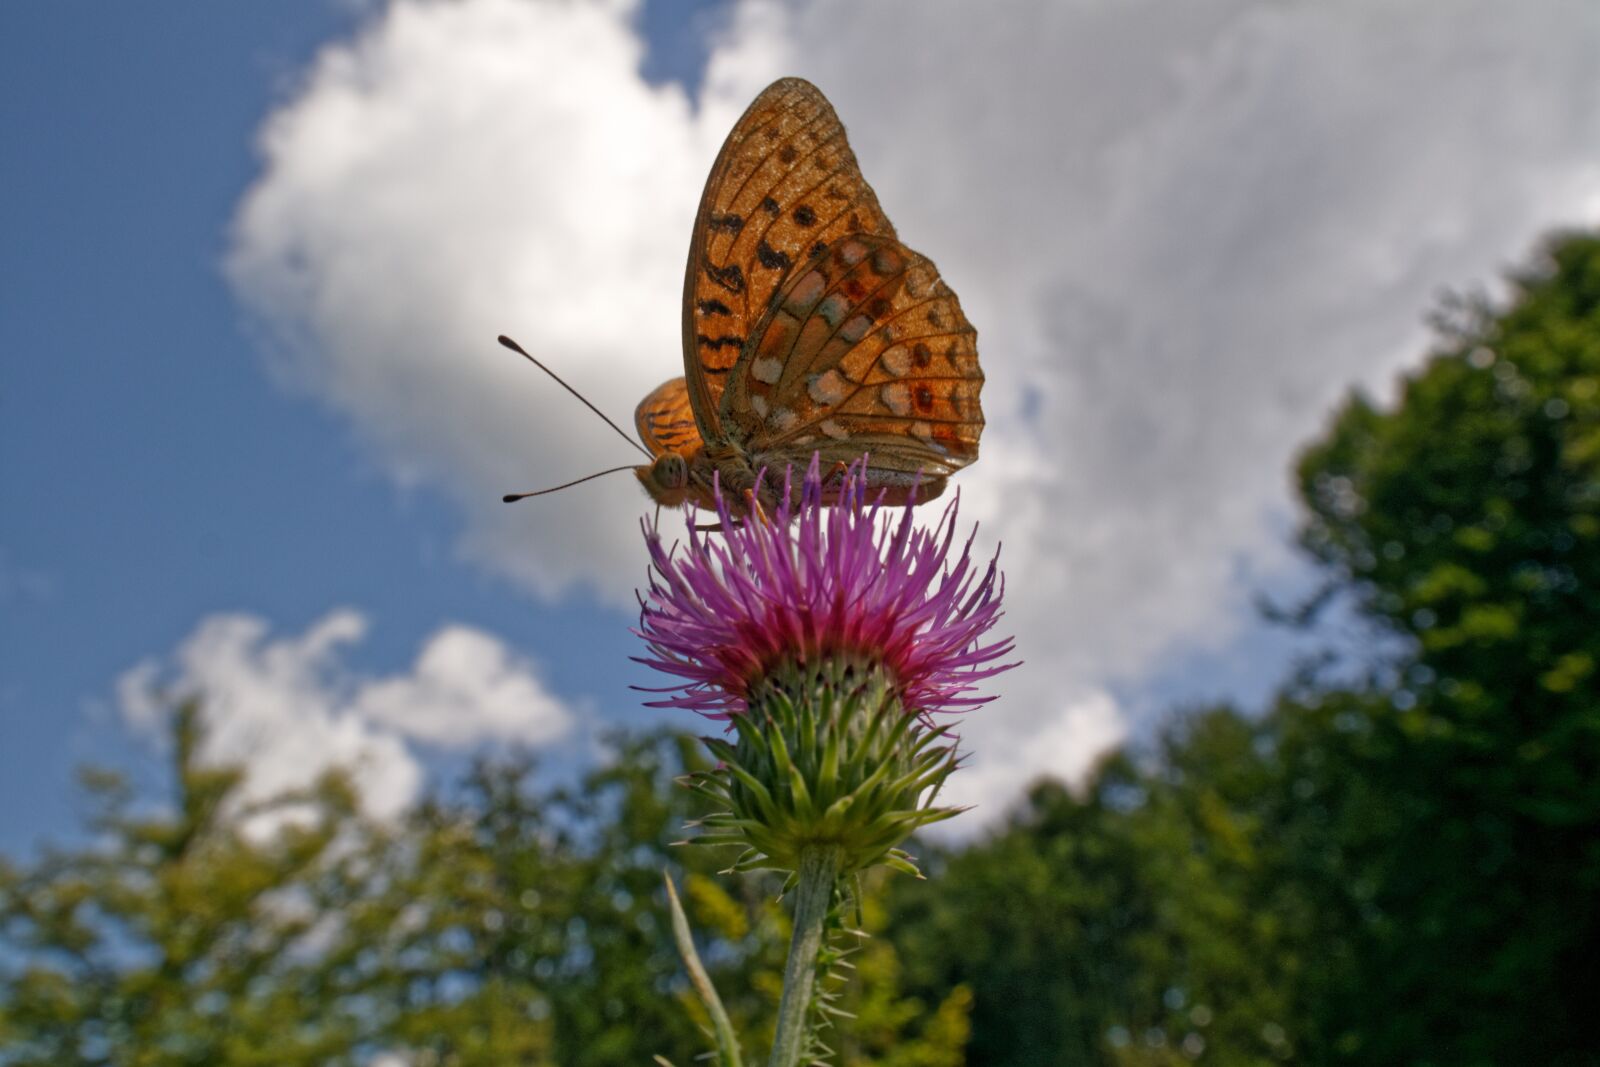 Samsung NX30 sample photo. Butterfly, clouds, nature photography